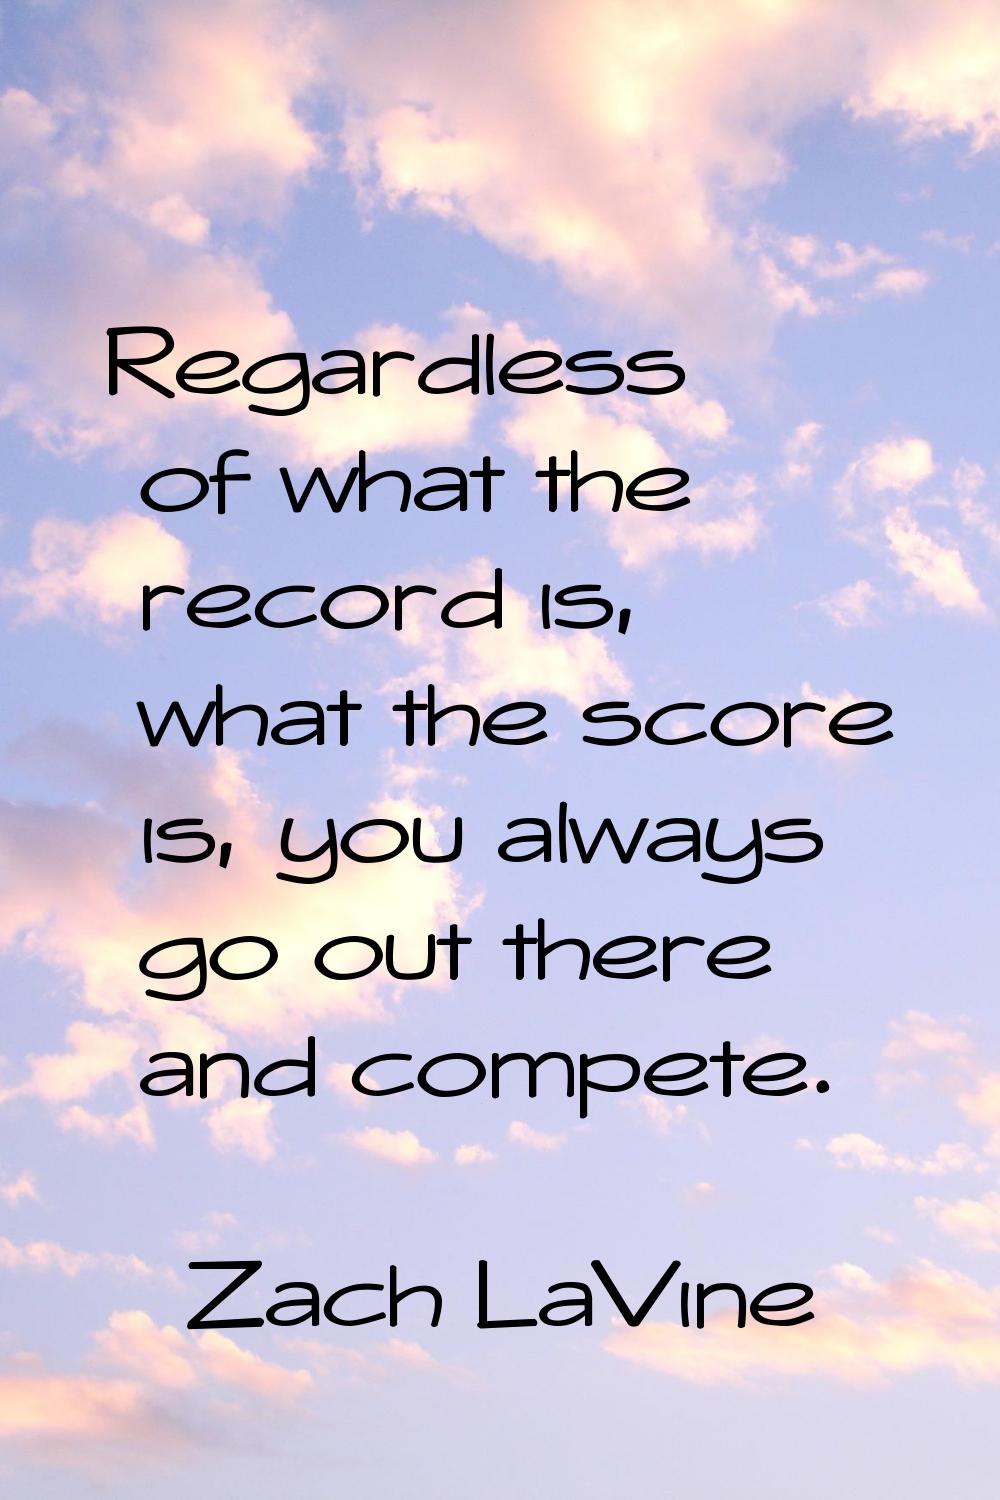 Regardless of what the record is, what the score is, you always go out there and compete.